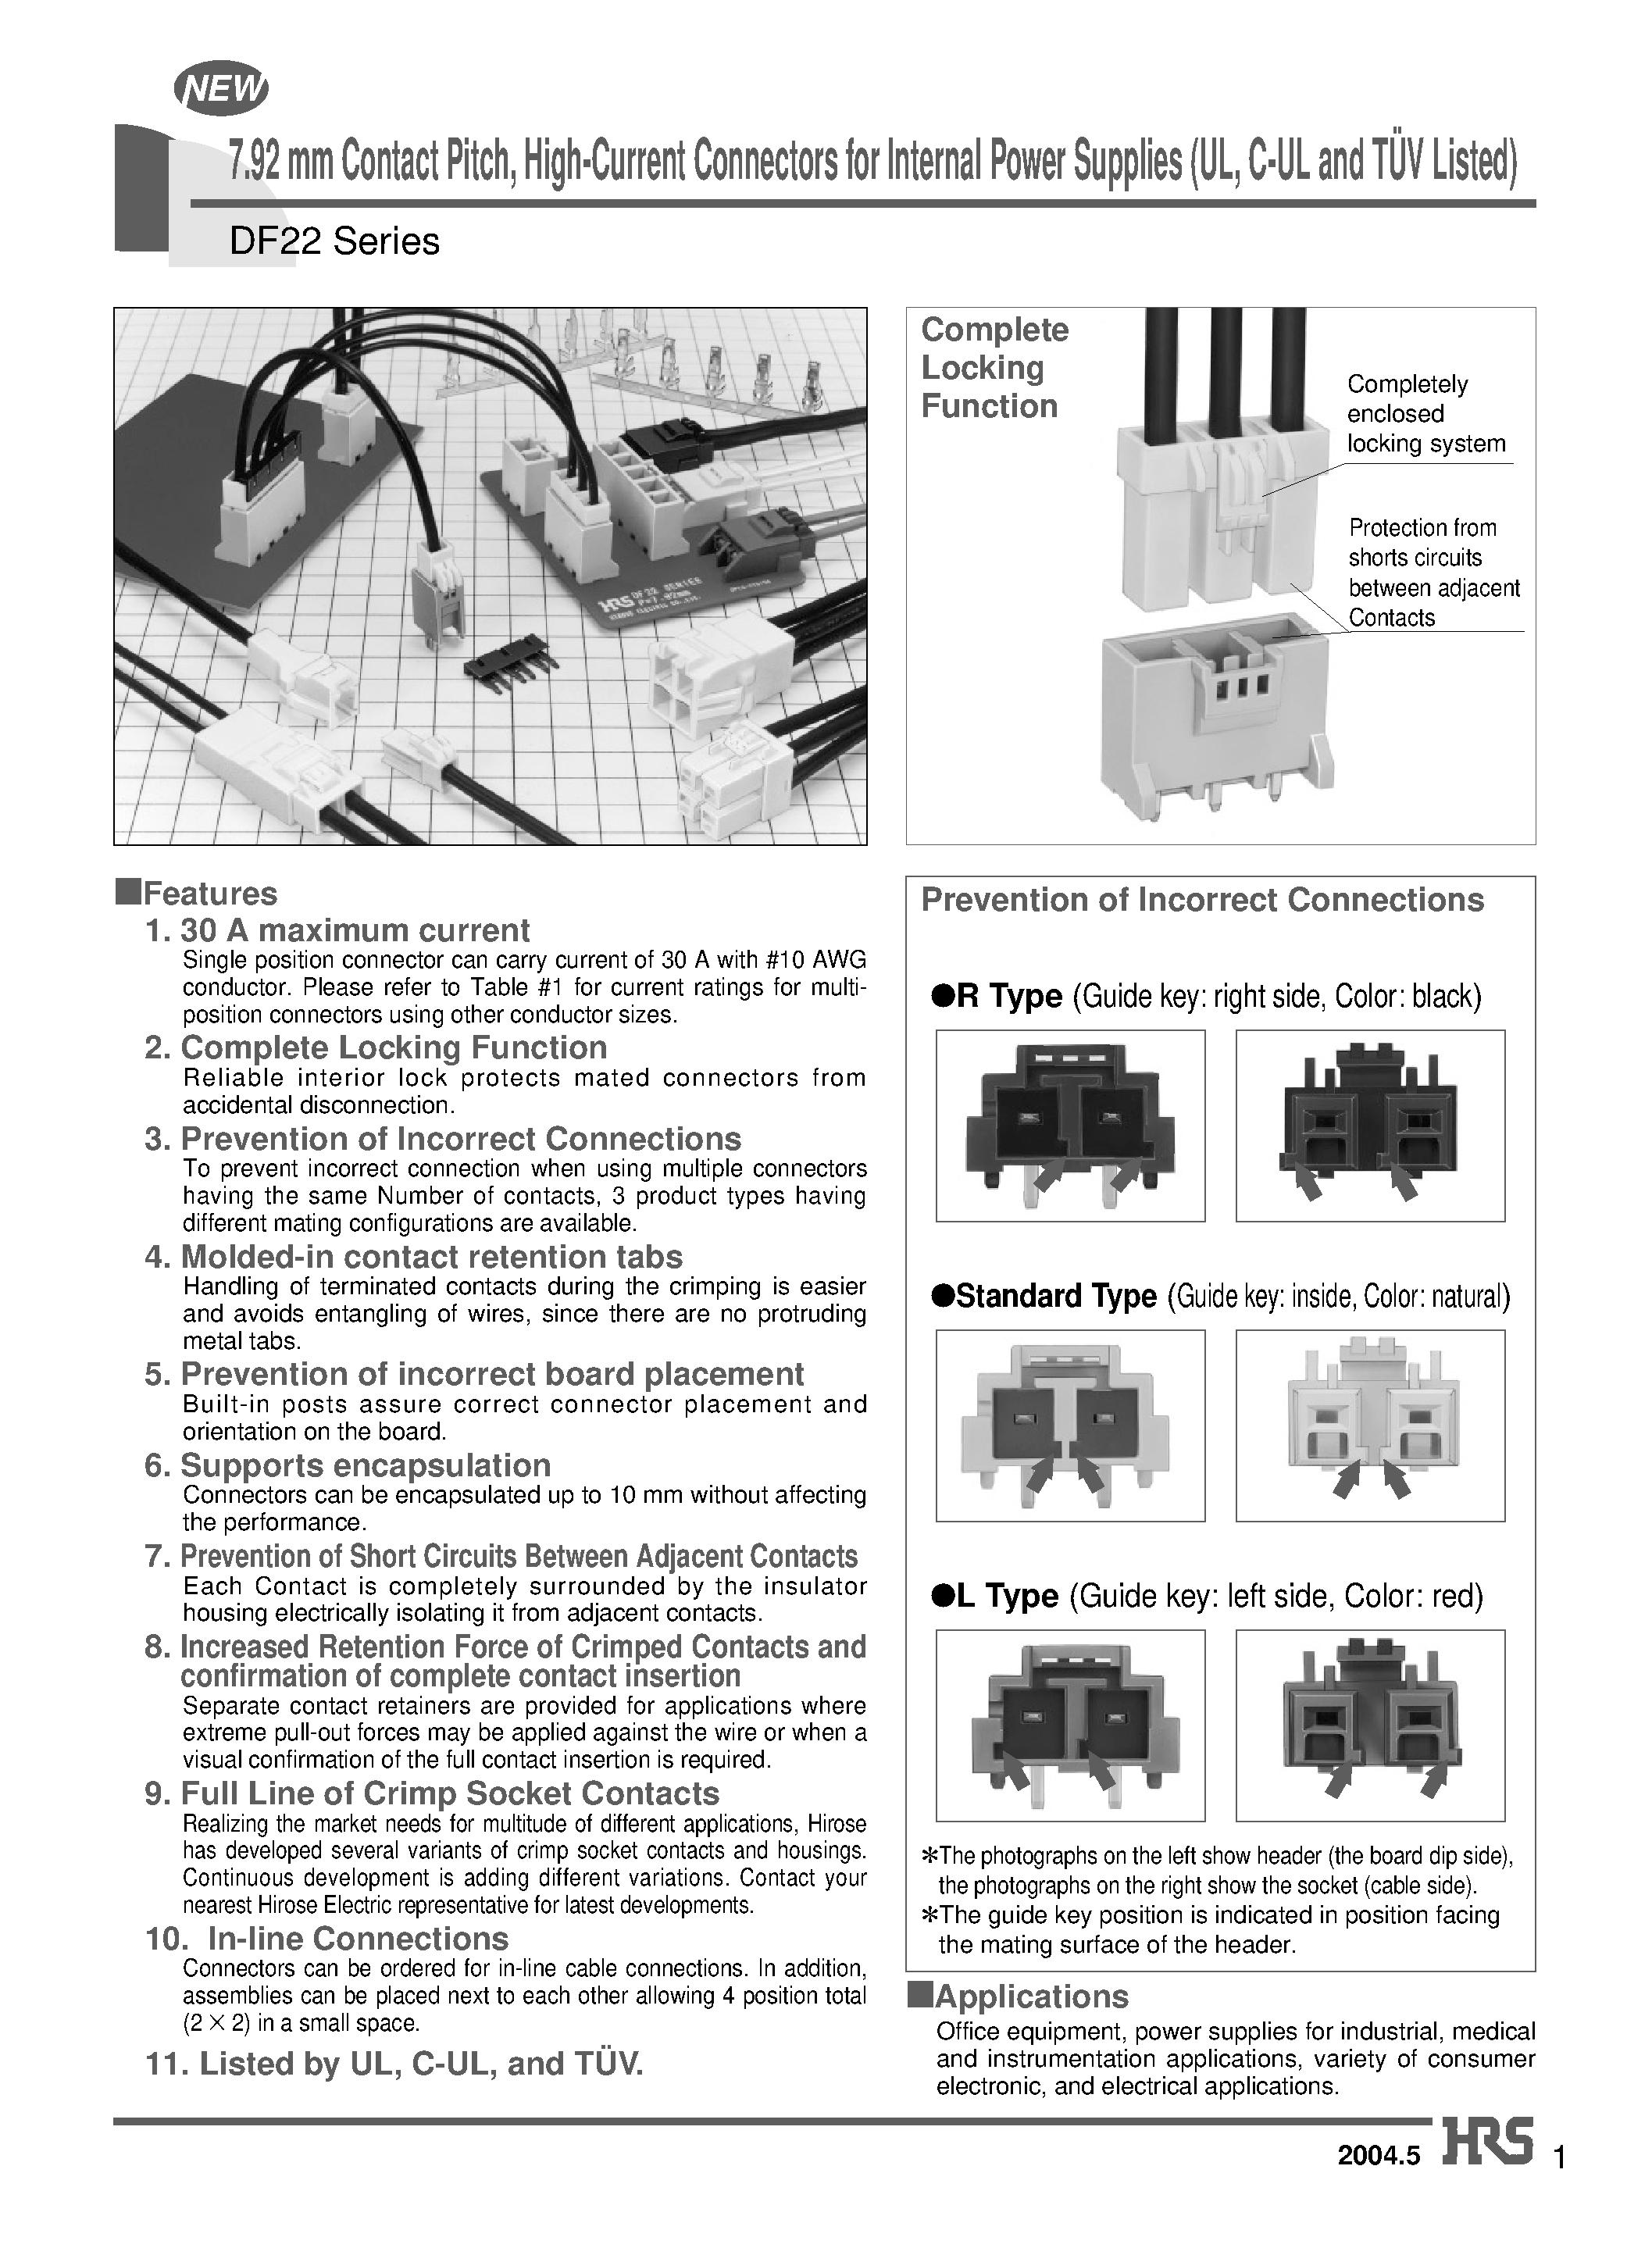 Datasheet DF22A-2S-7.92DSA - 7.92 mm Contact Pitch/ High-Current Connectors for Internal Power Supplies (UL/ C-UL and TUV Listed) page 1